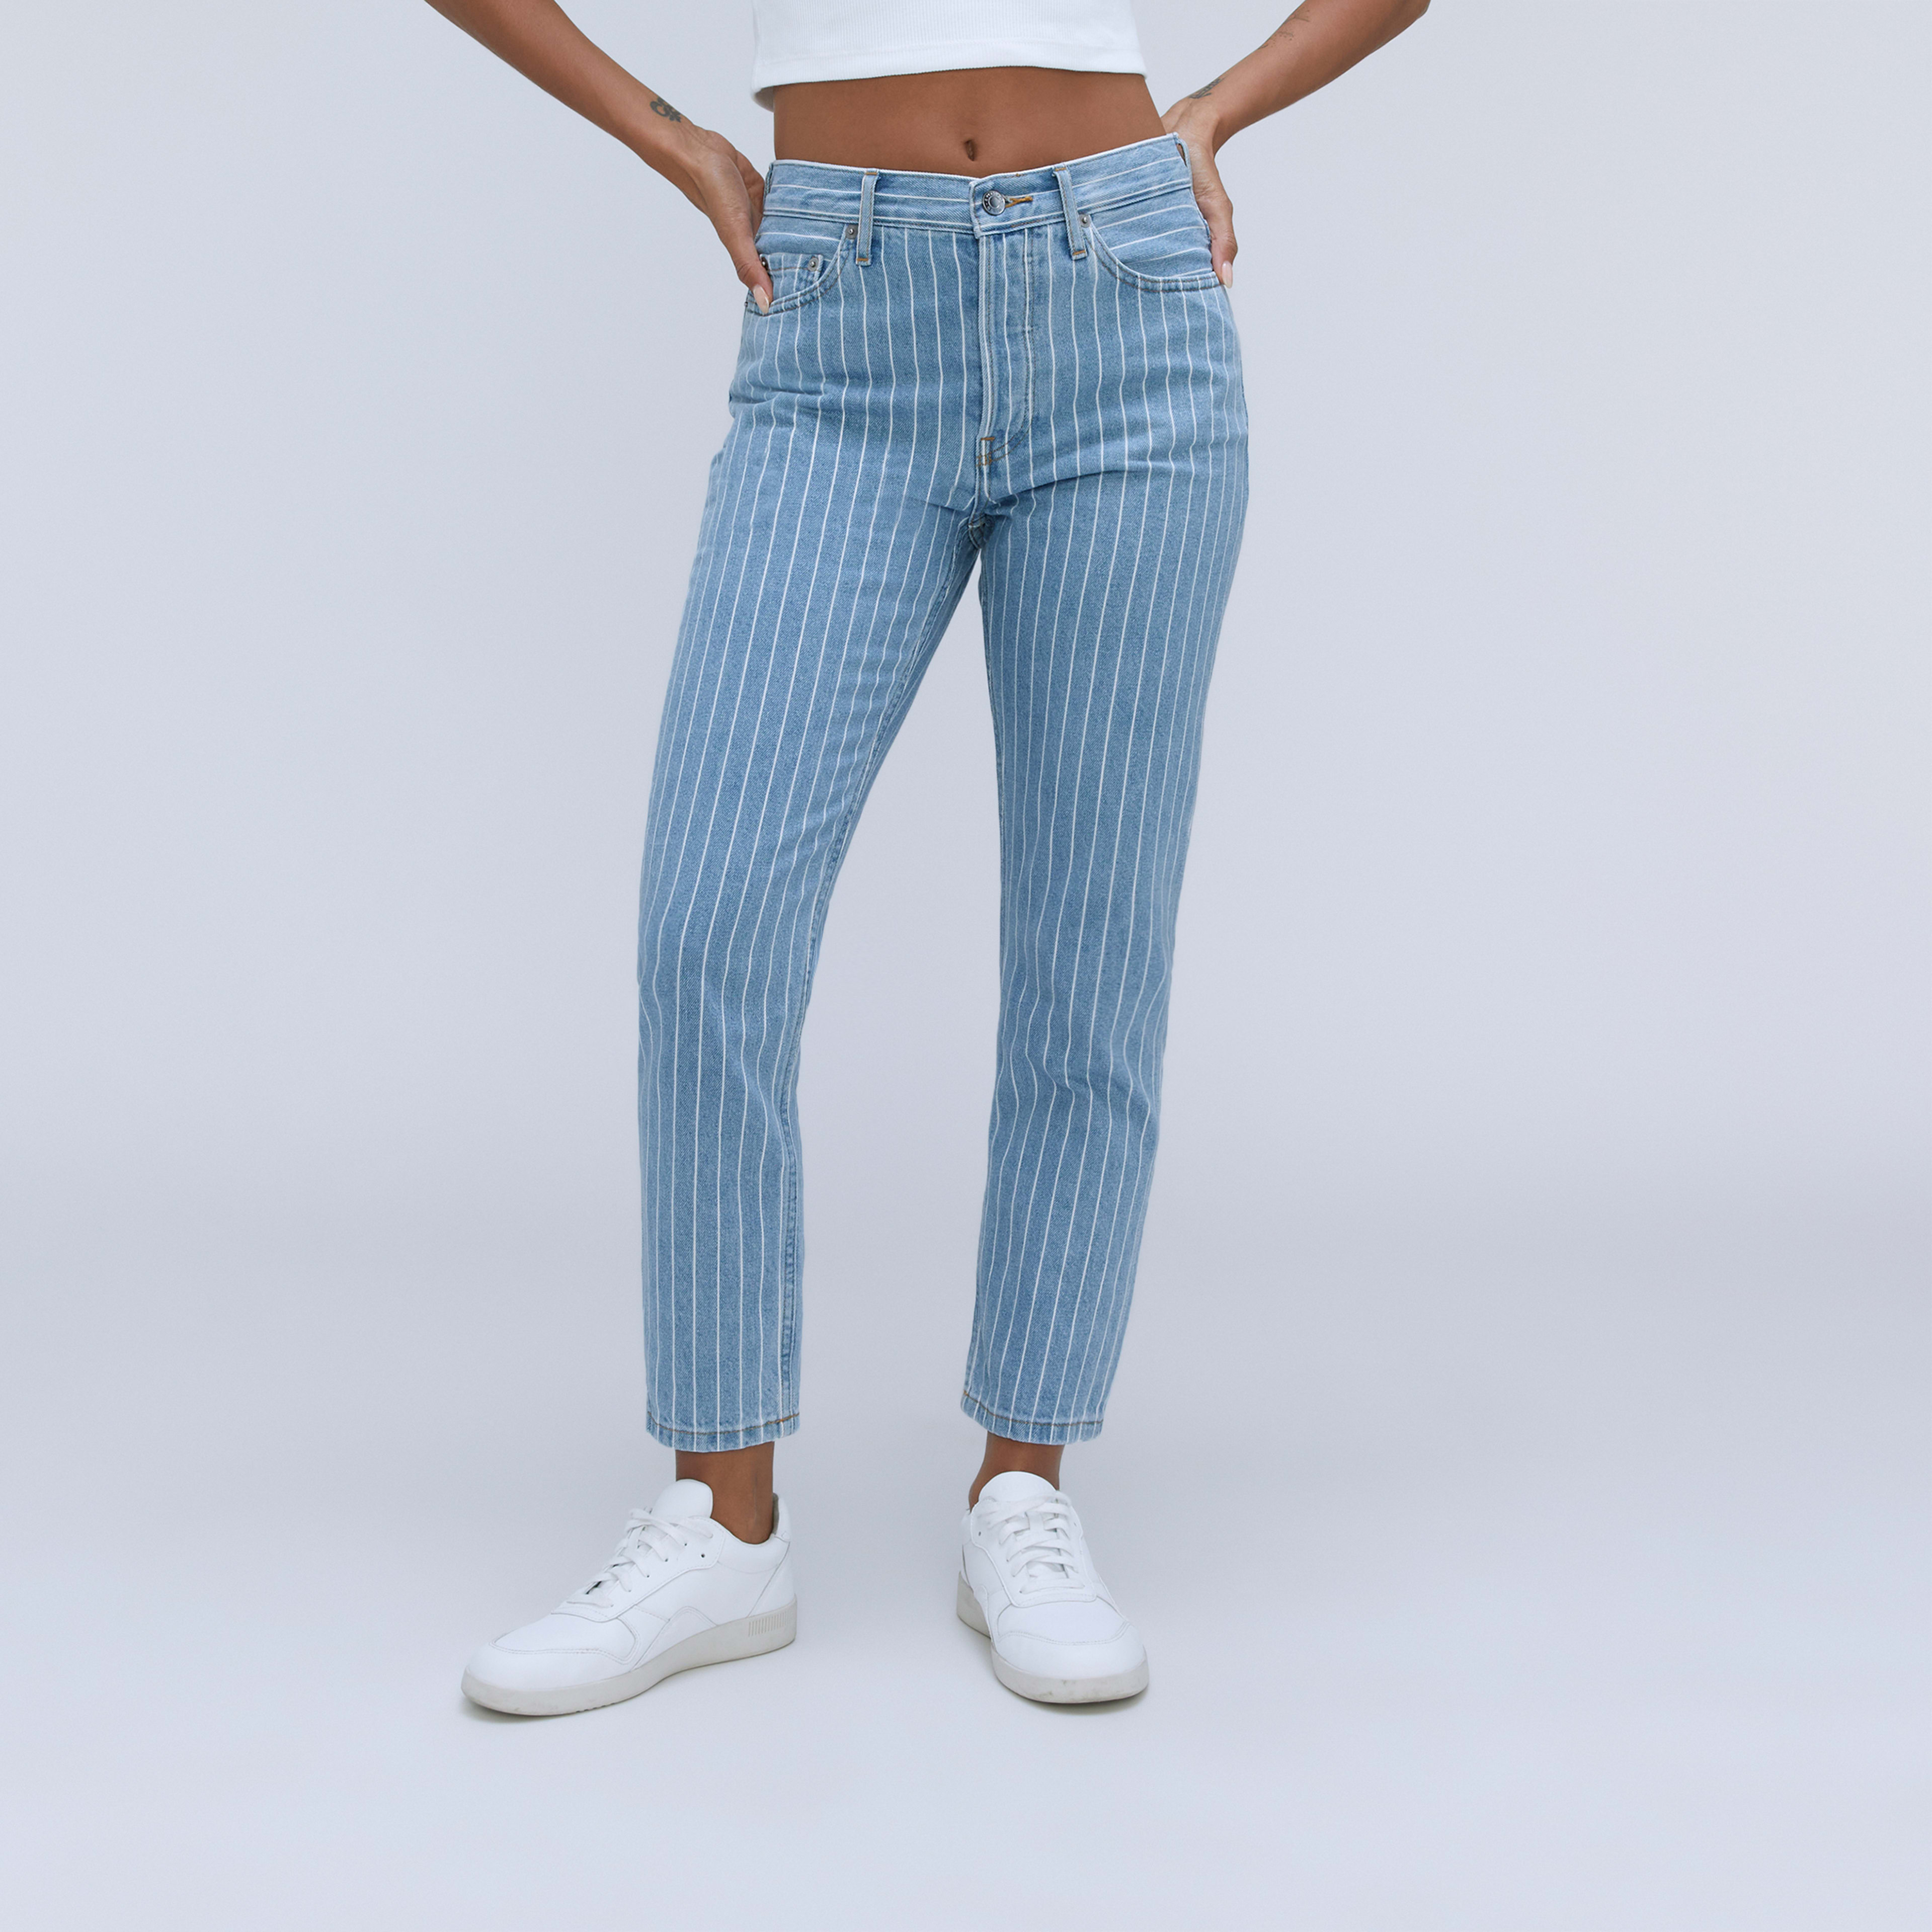 The 90's Cheeky Straight Jean - Vintage Light Blue